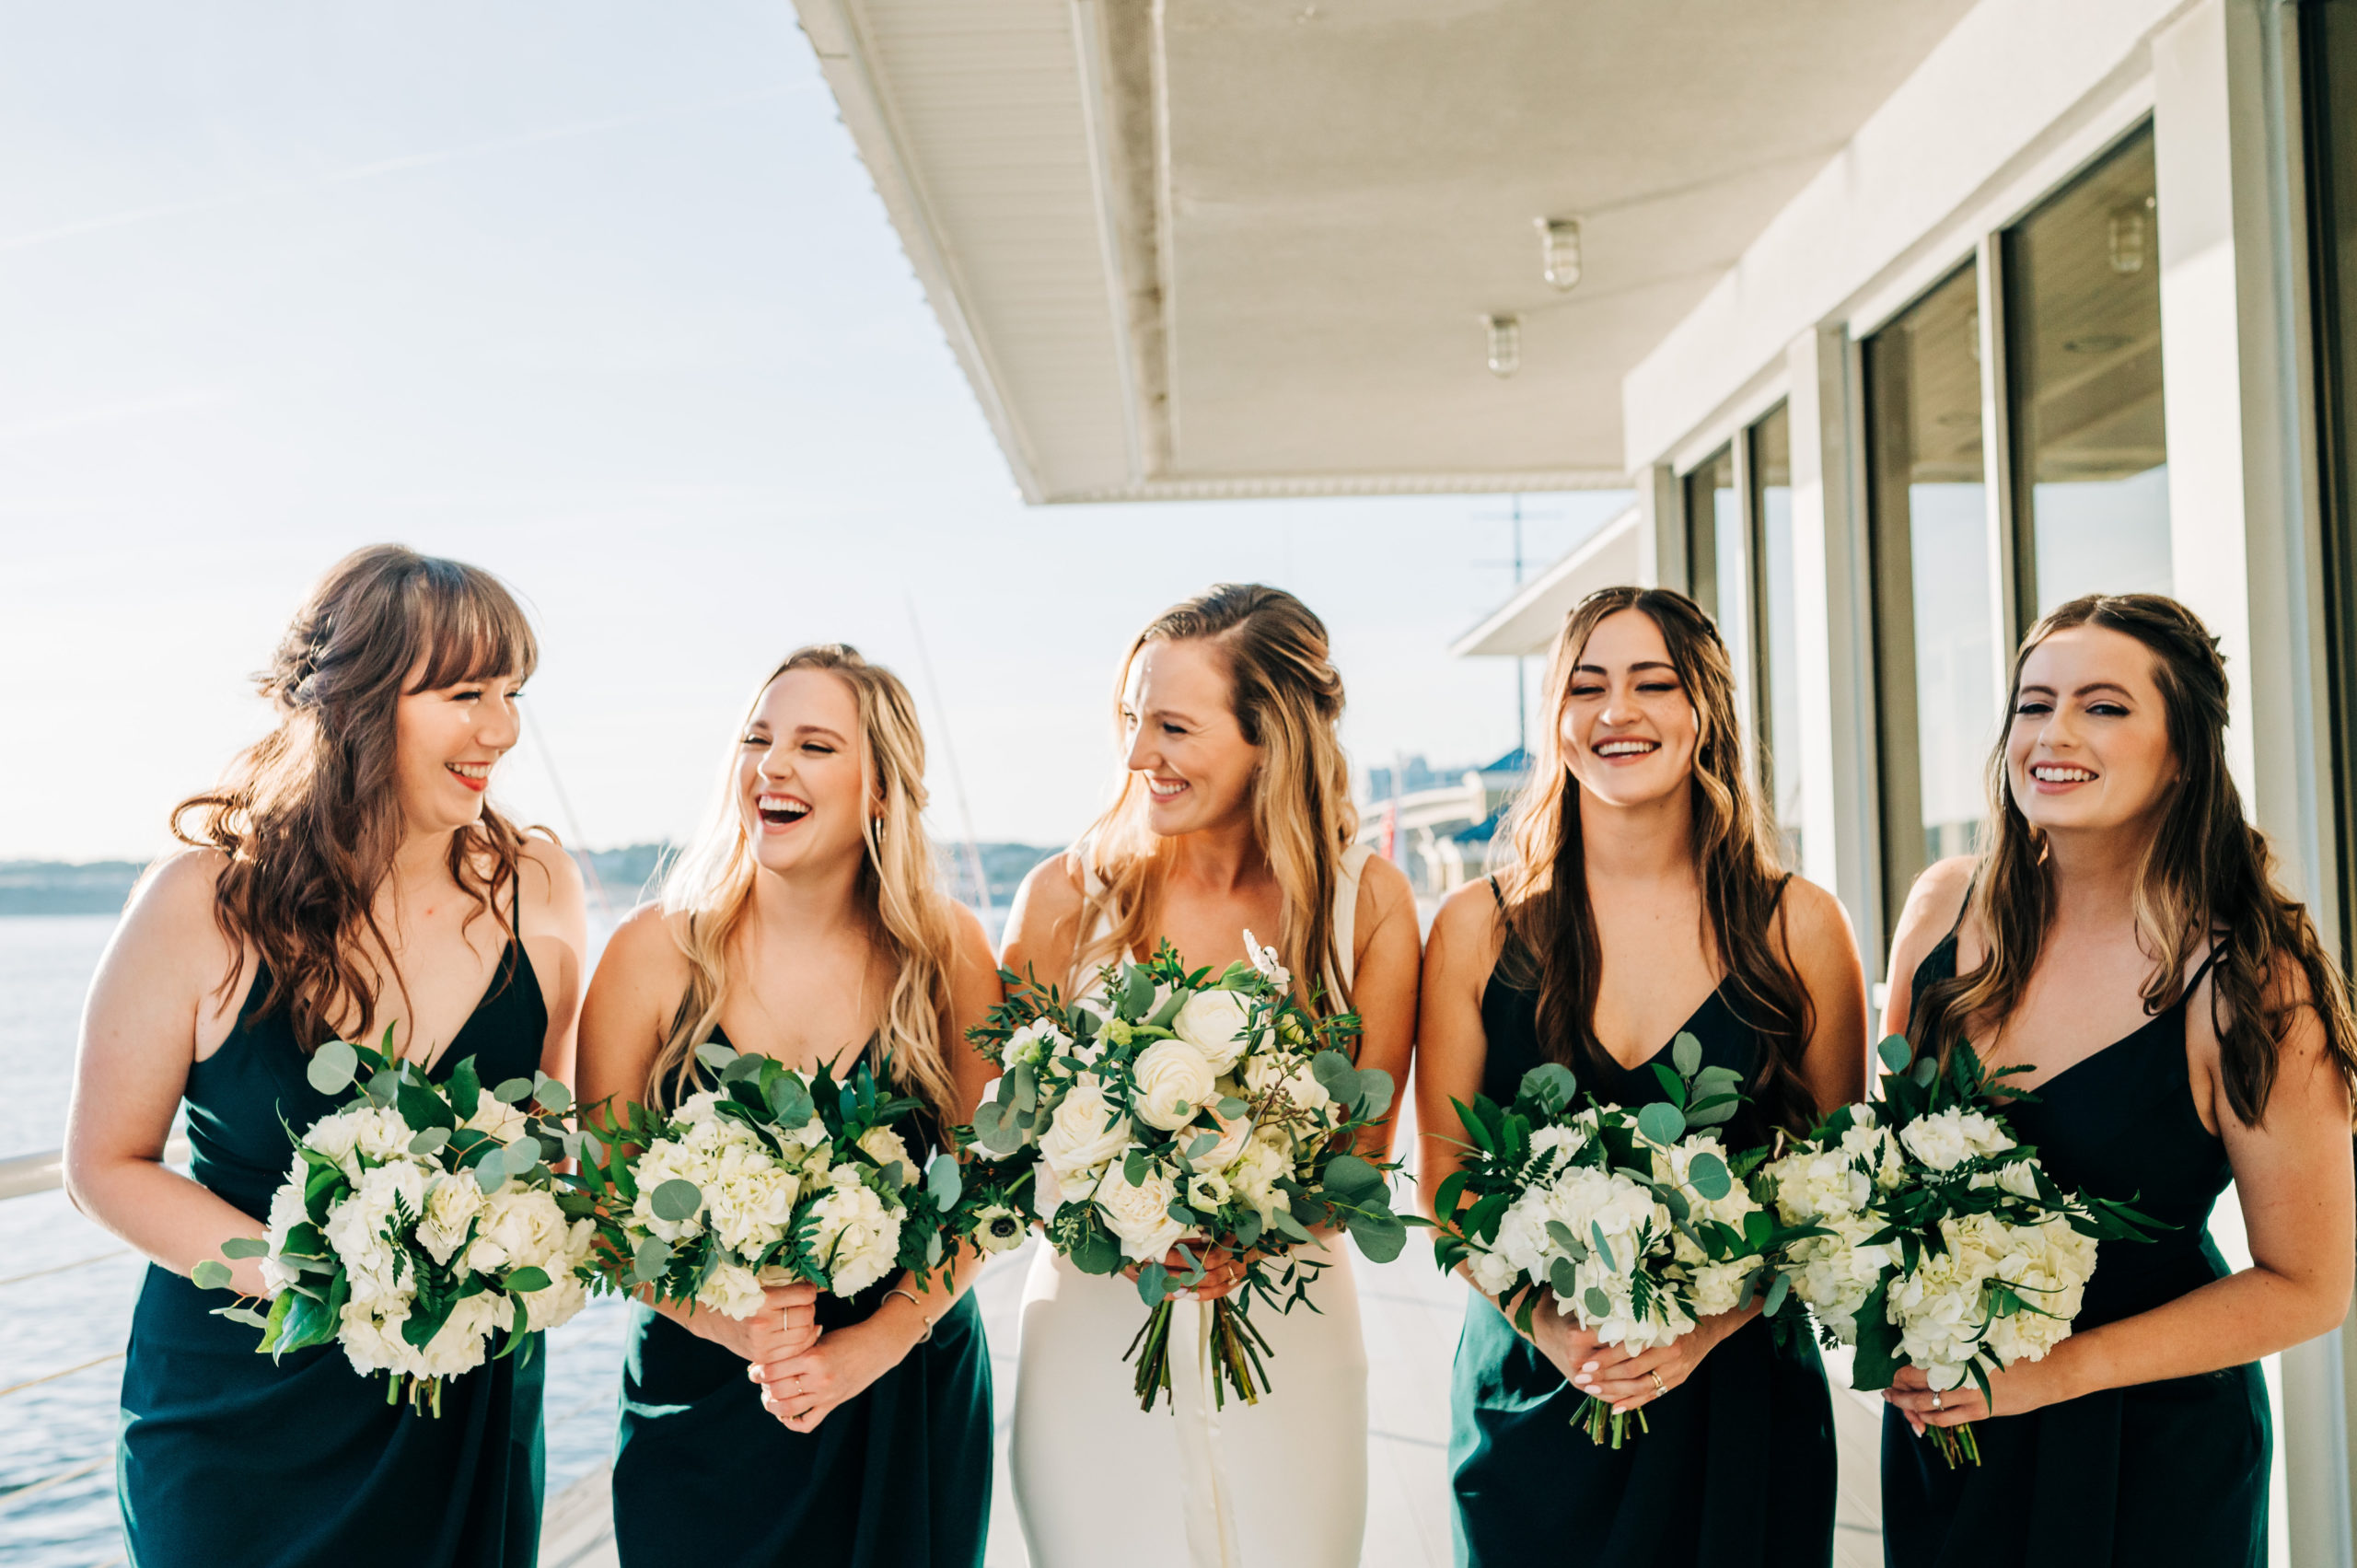 Bride keeping her bridal party small with 4 friends